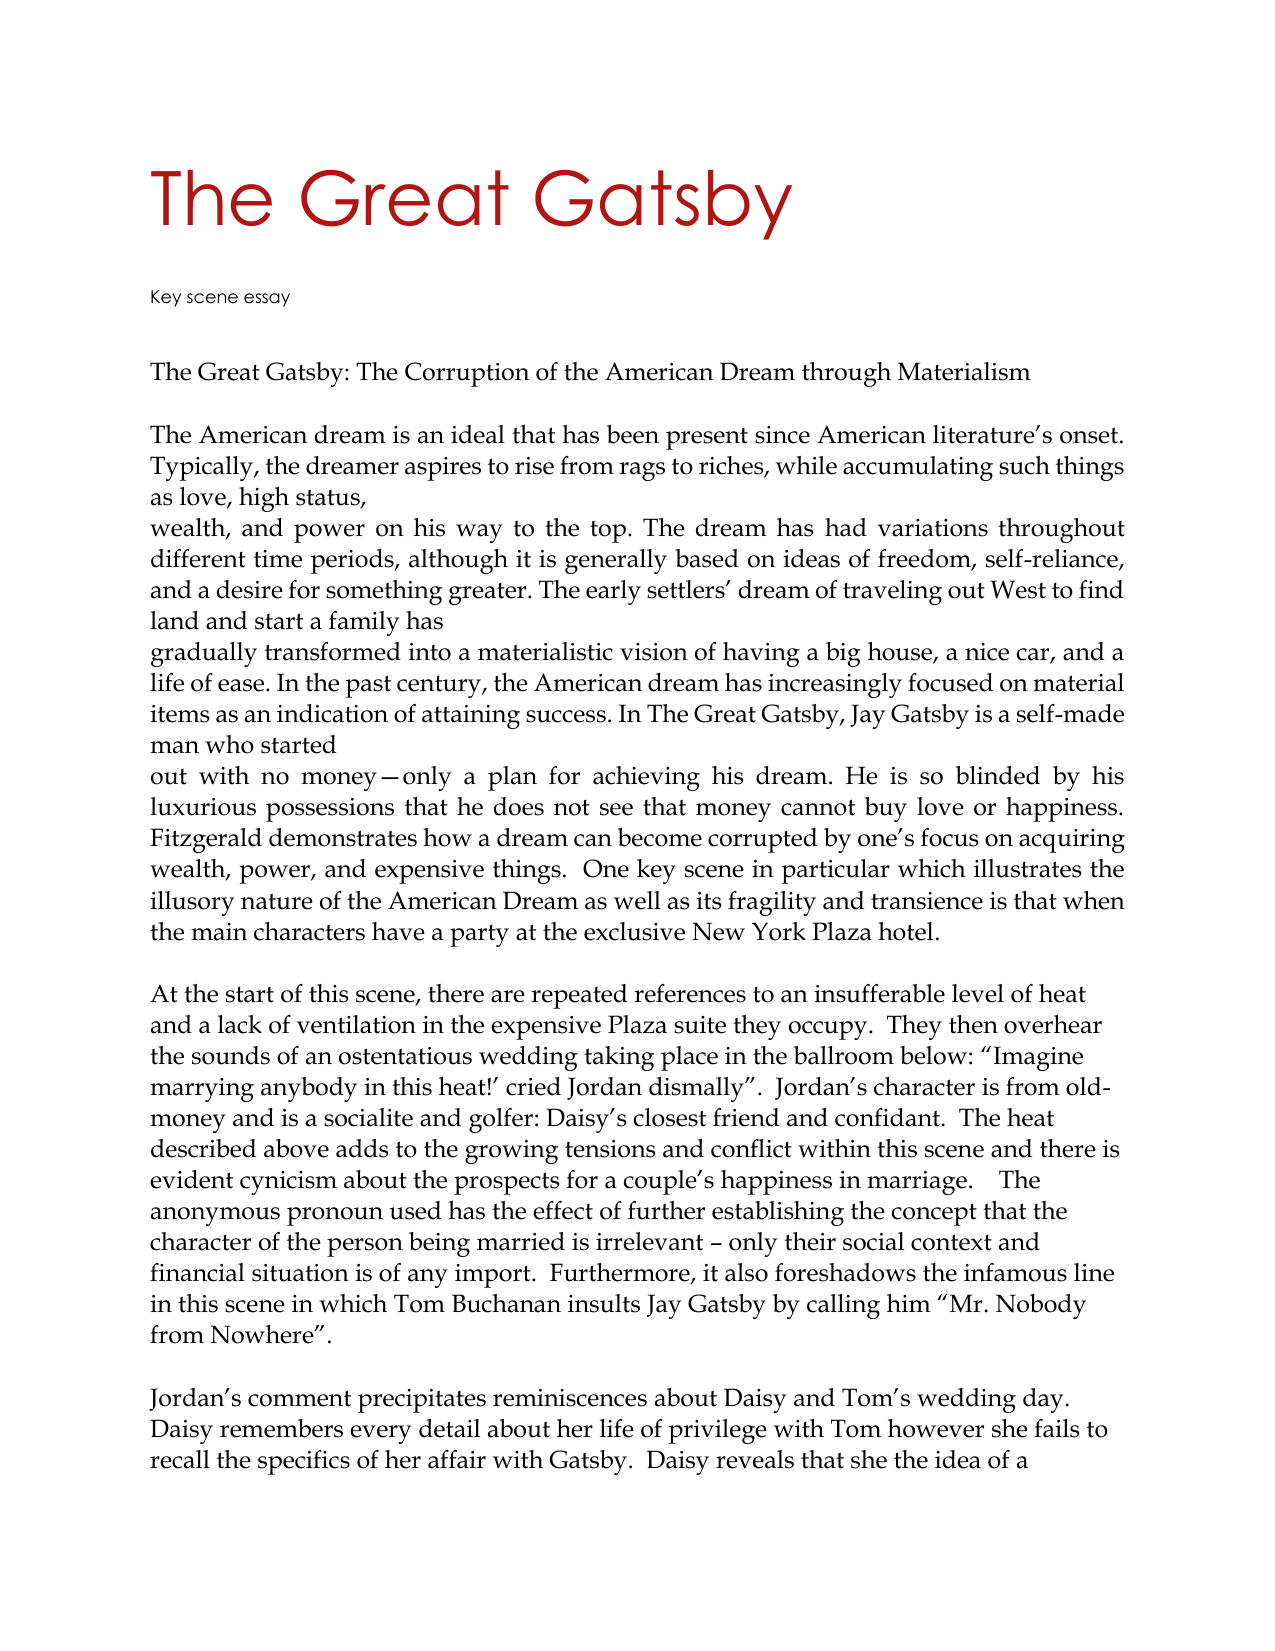 great gatsby thesis examples